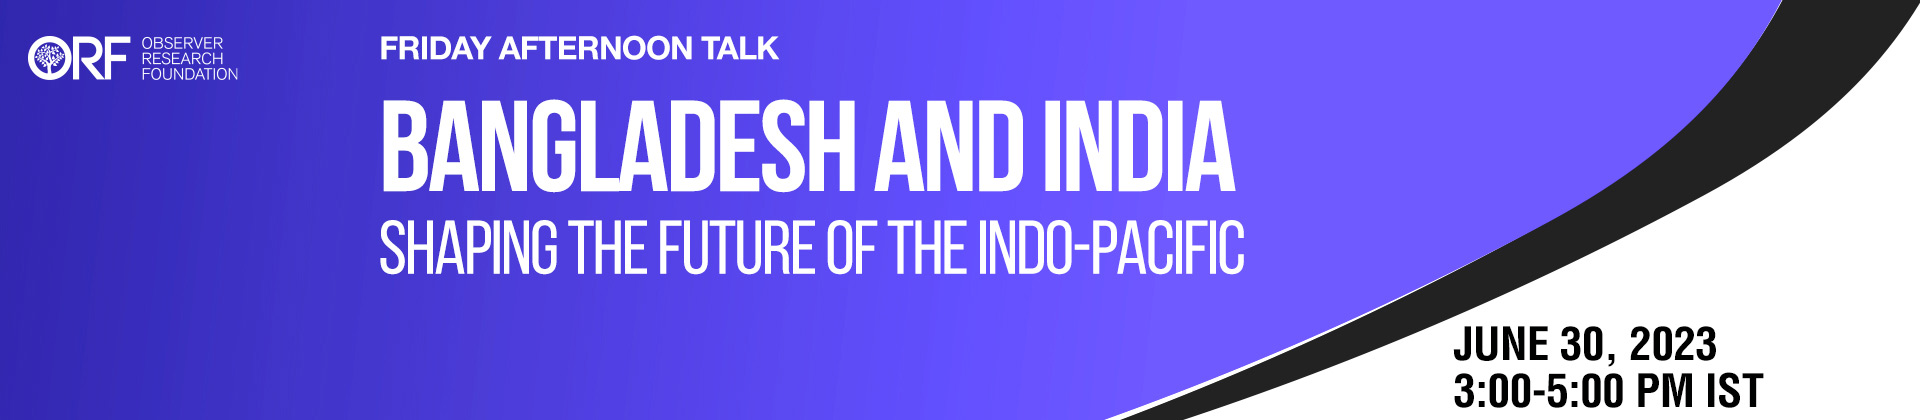 Friday Afternoon Talk | Bangladesh and India: Shaping the future of the Indo-Pacific